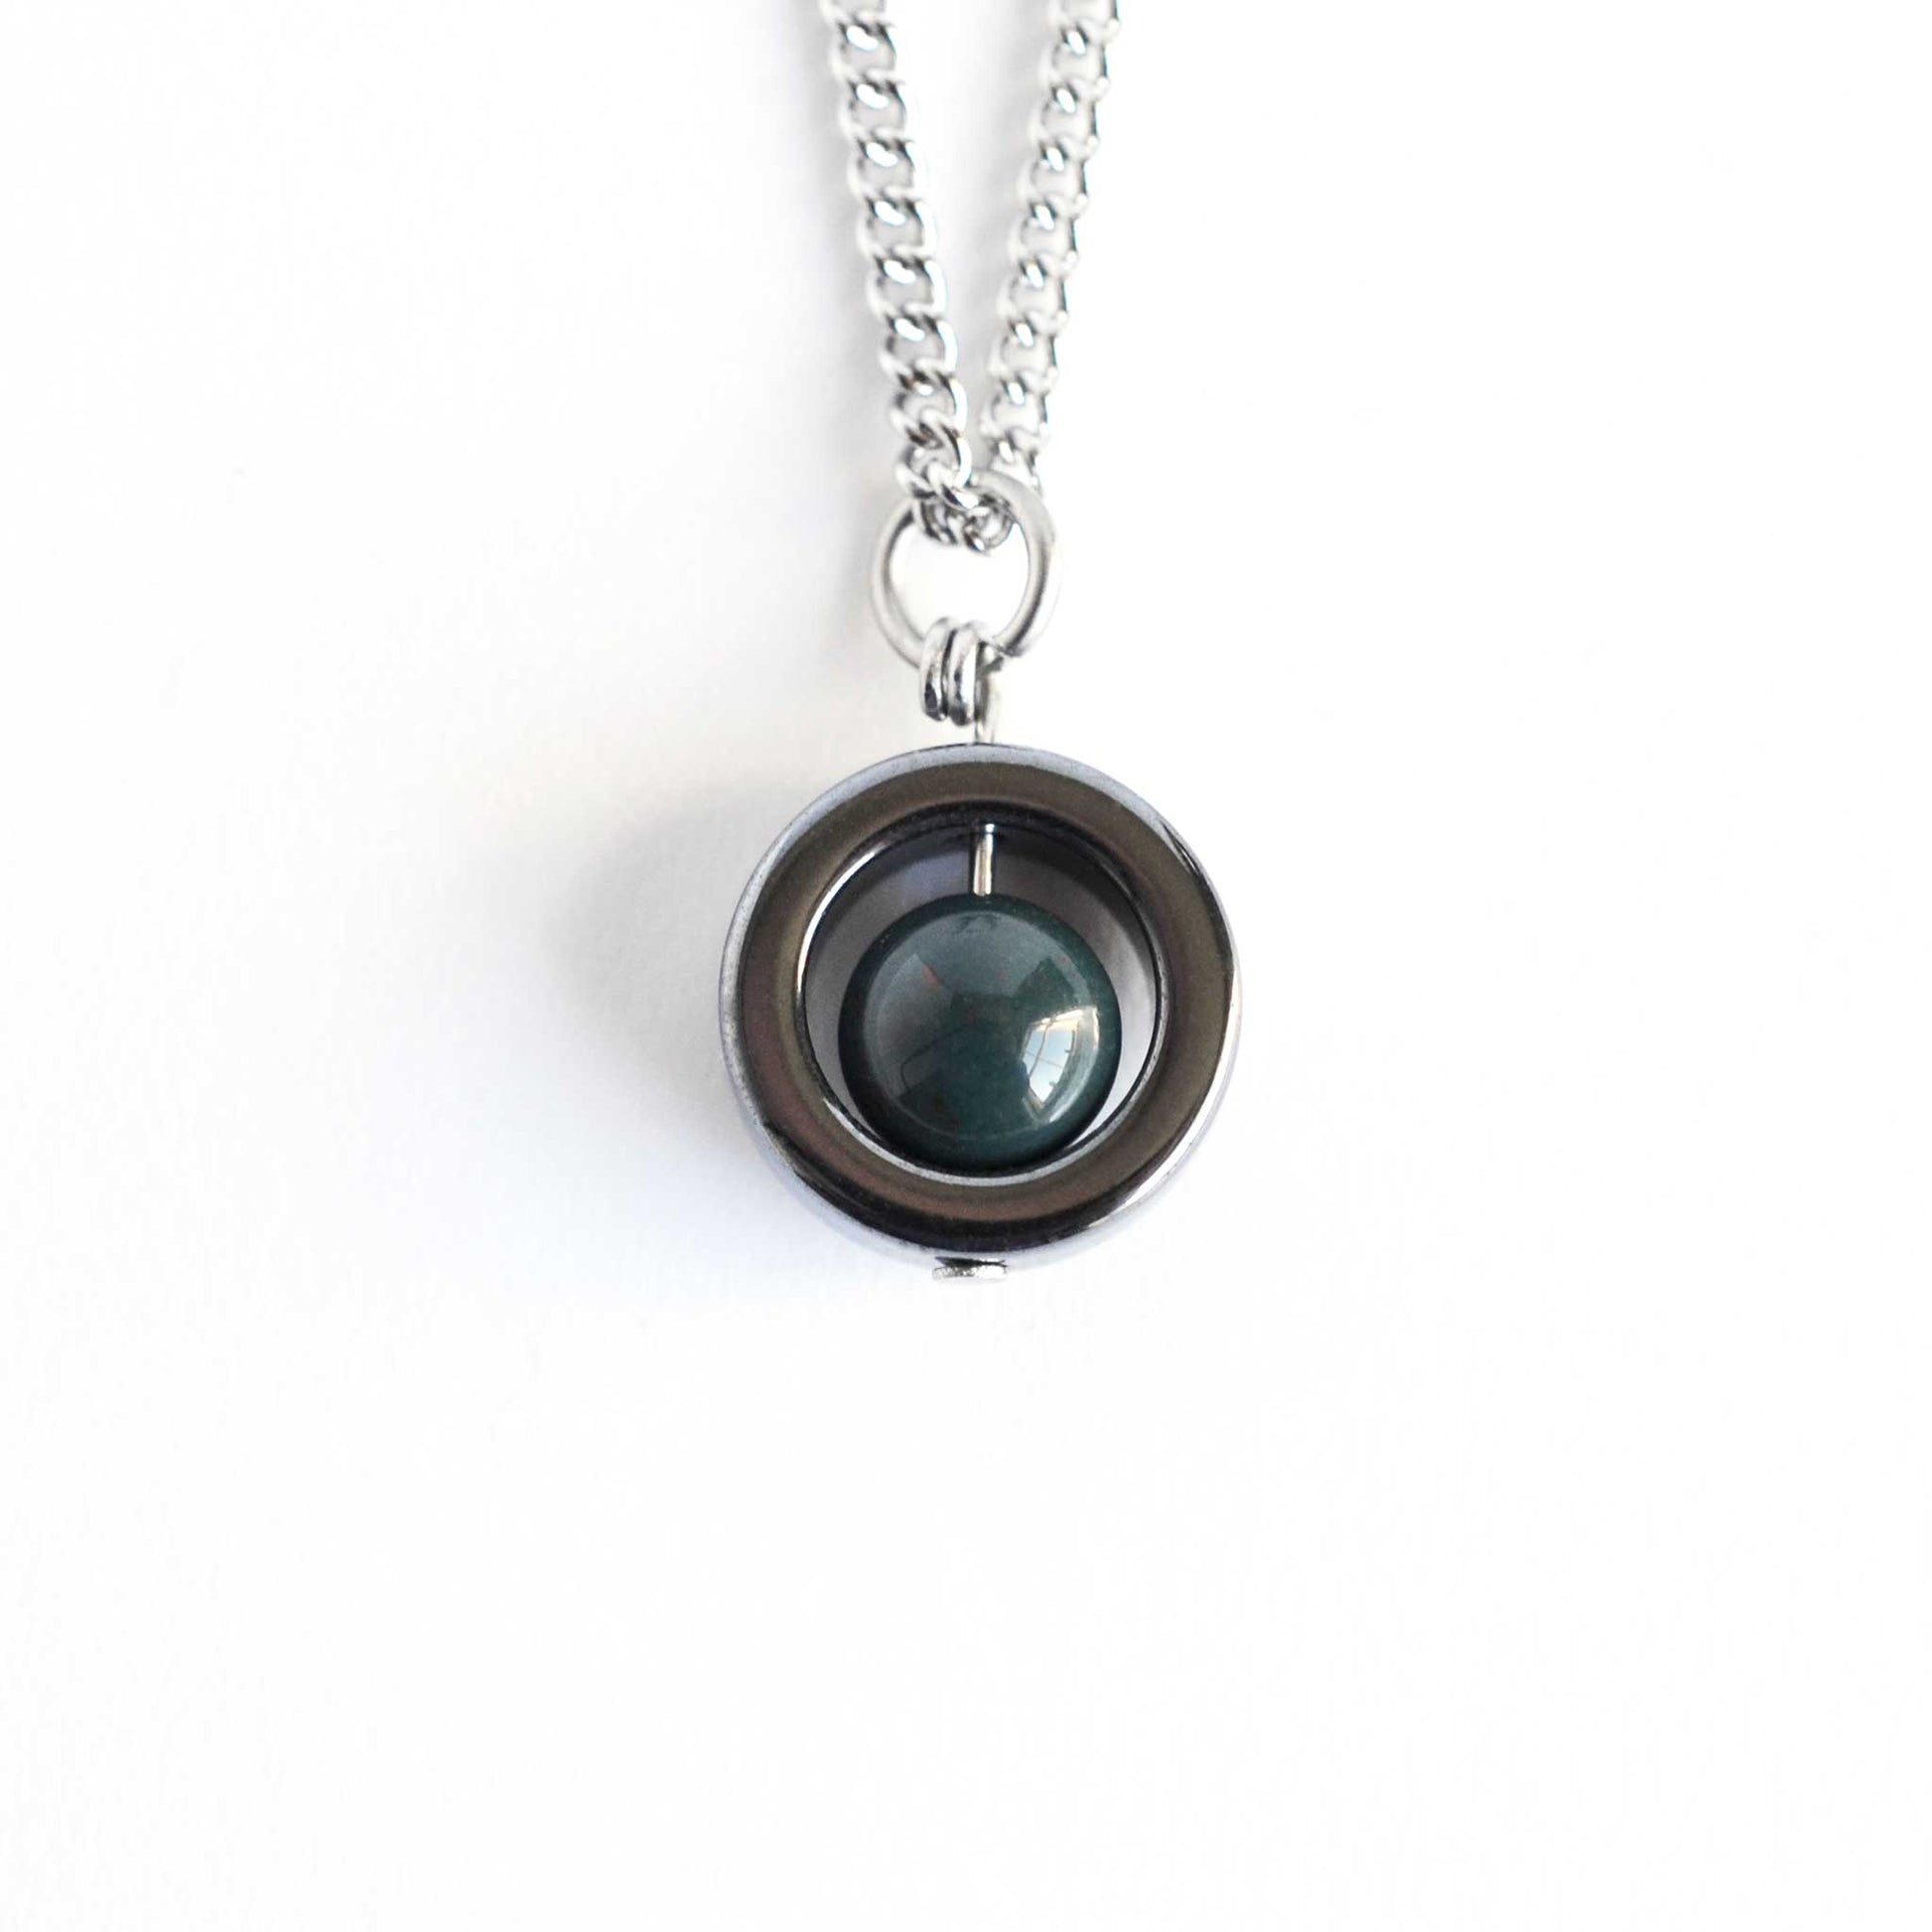 Hematite and green Bloodstone spinner necklace on white background.